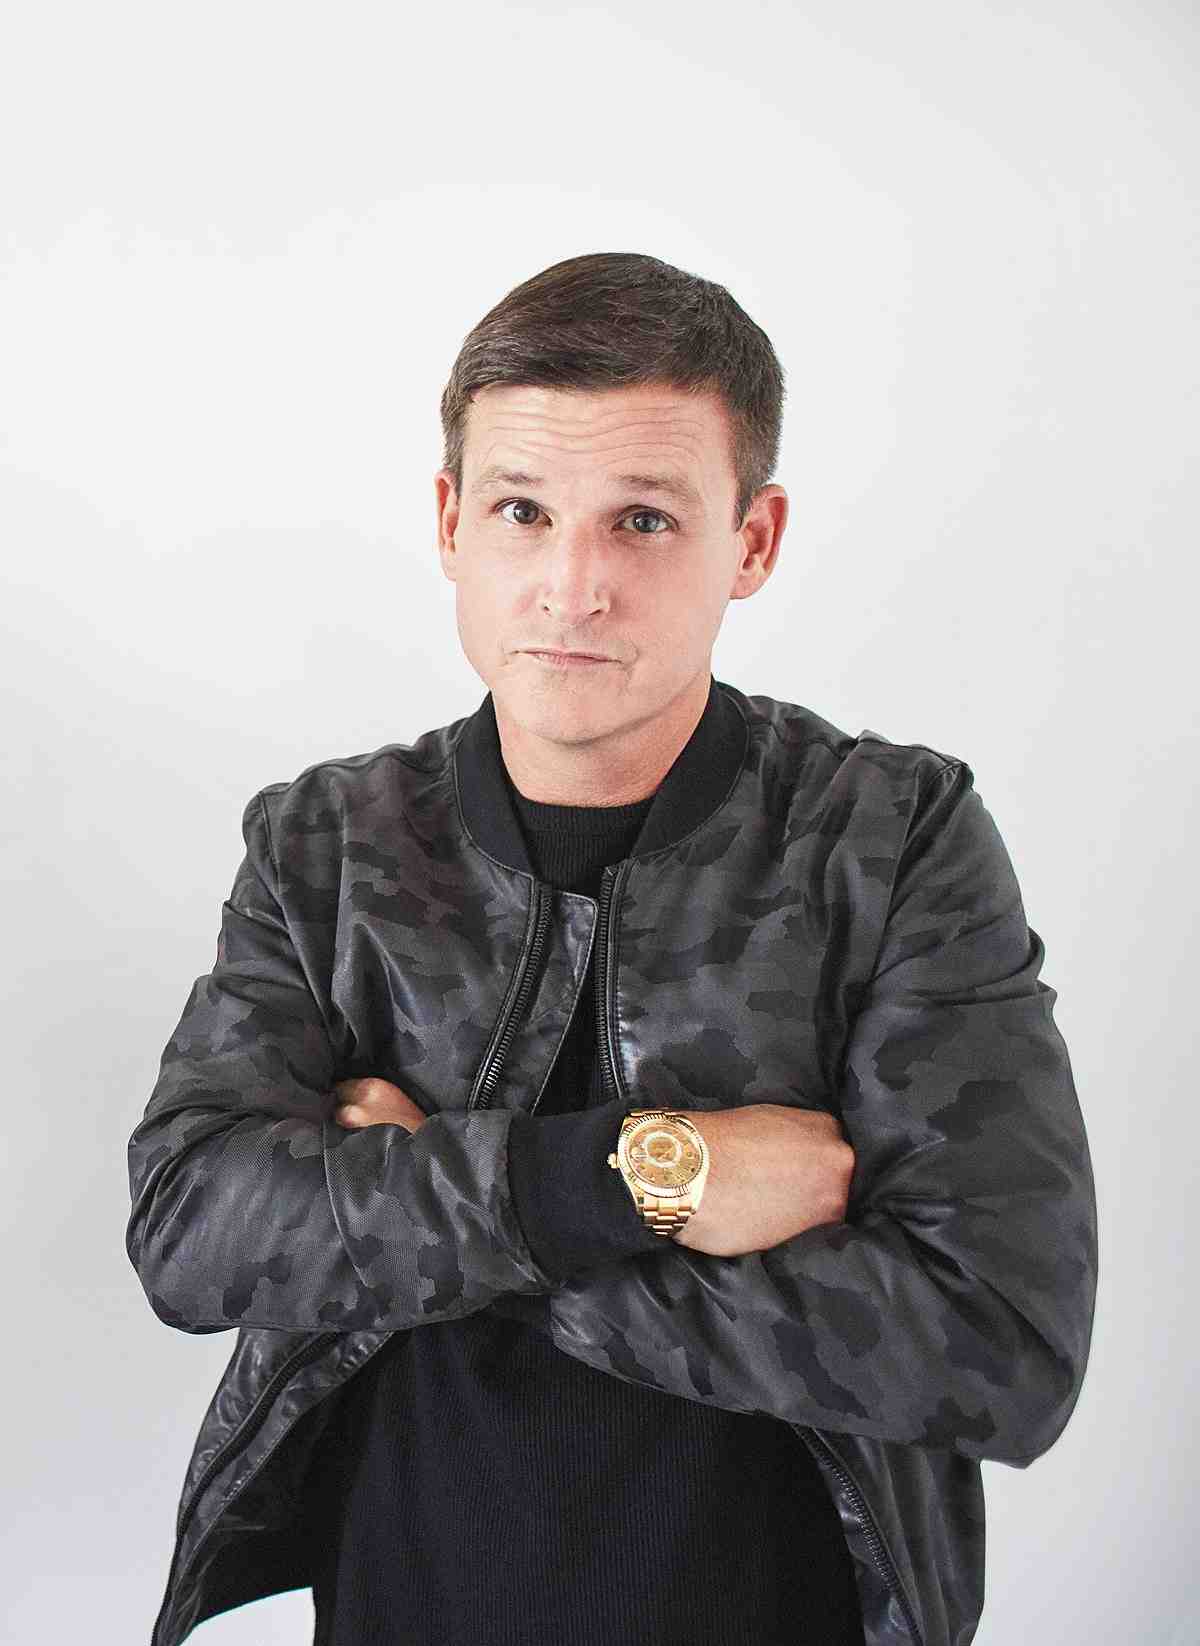 Taking a 360 flip into finance, skate enthusiast Rob Dyrdek's net worth sails to cool millions post 'Fantasy Factory'. Discover how he swapped rails for riches.